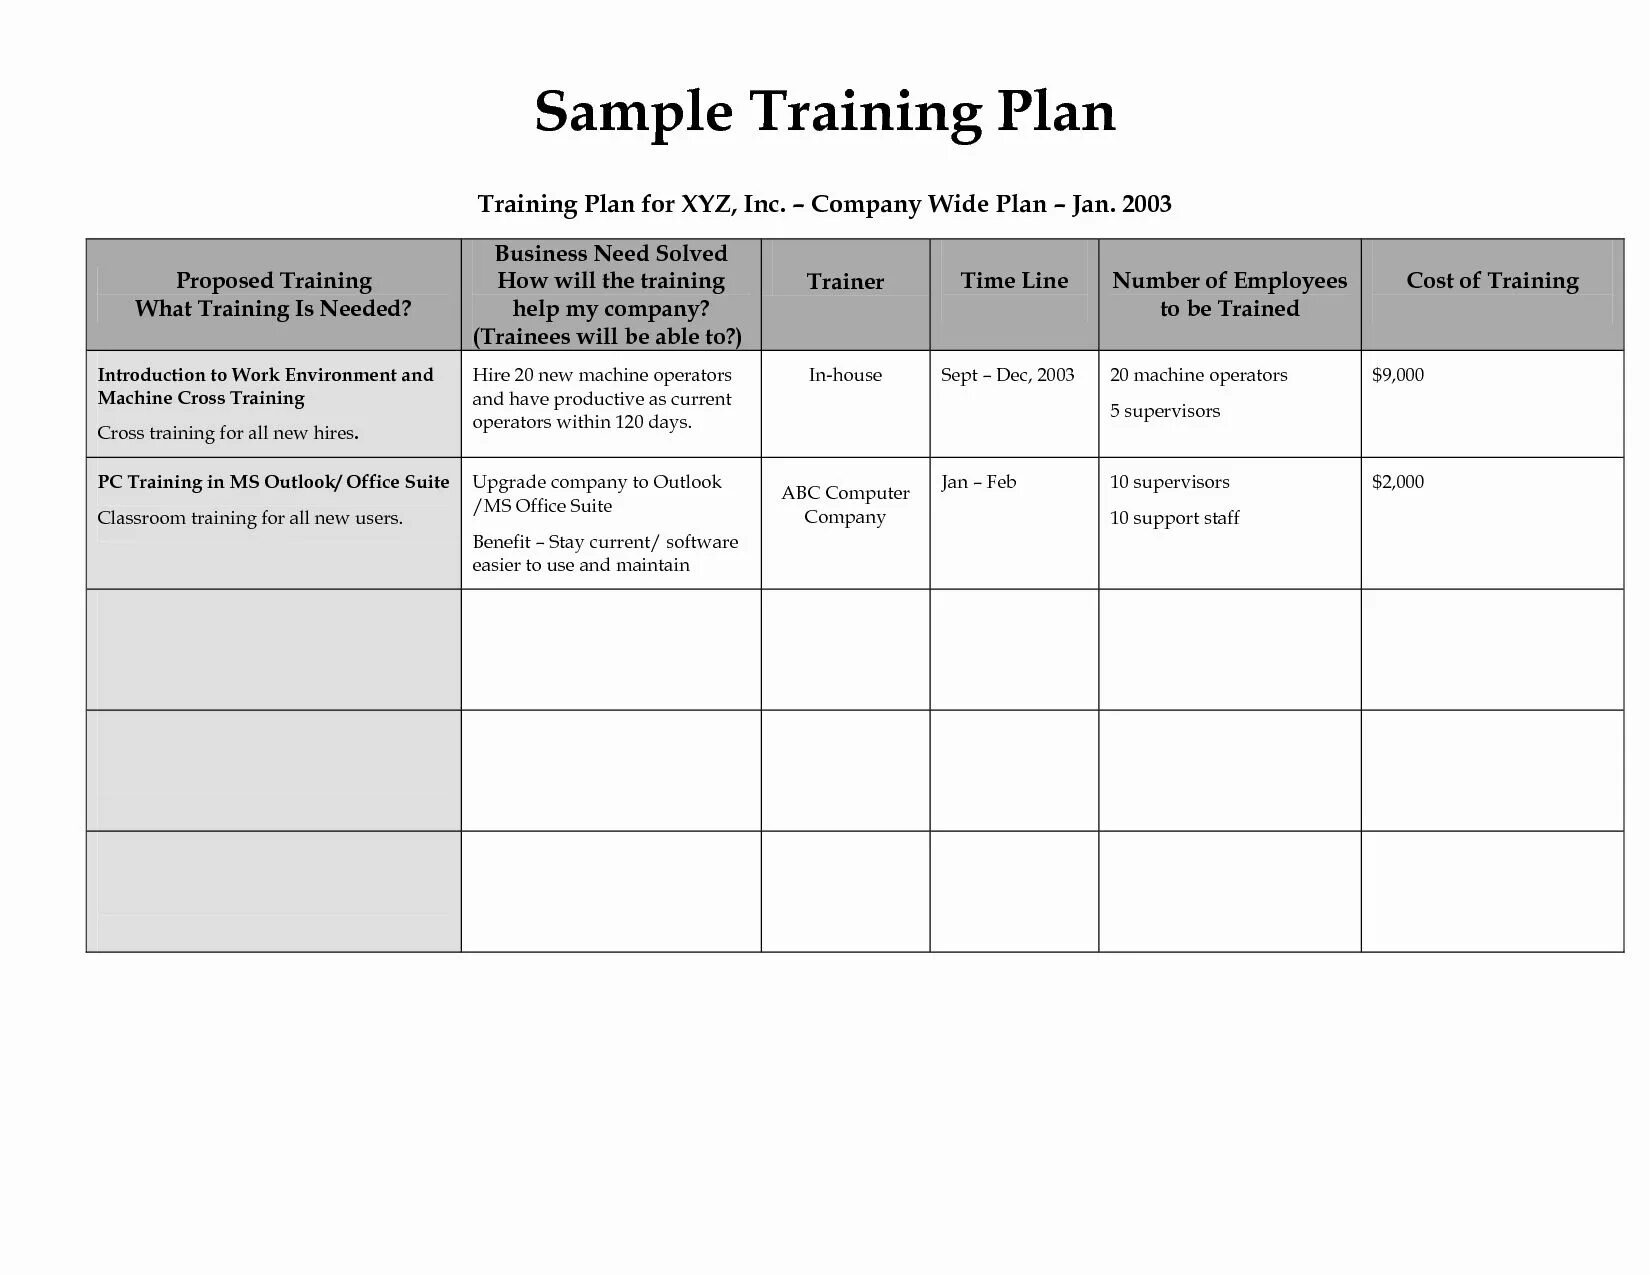 Training Plan. Training Plan Template. Training program examples. Training Plan текст.